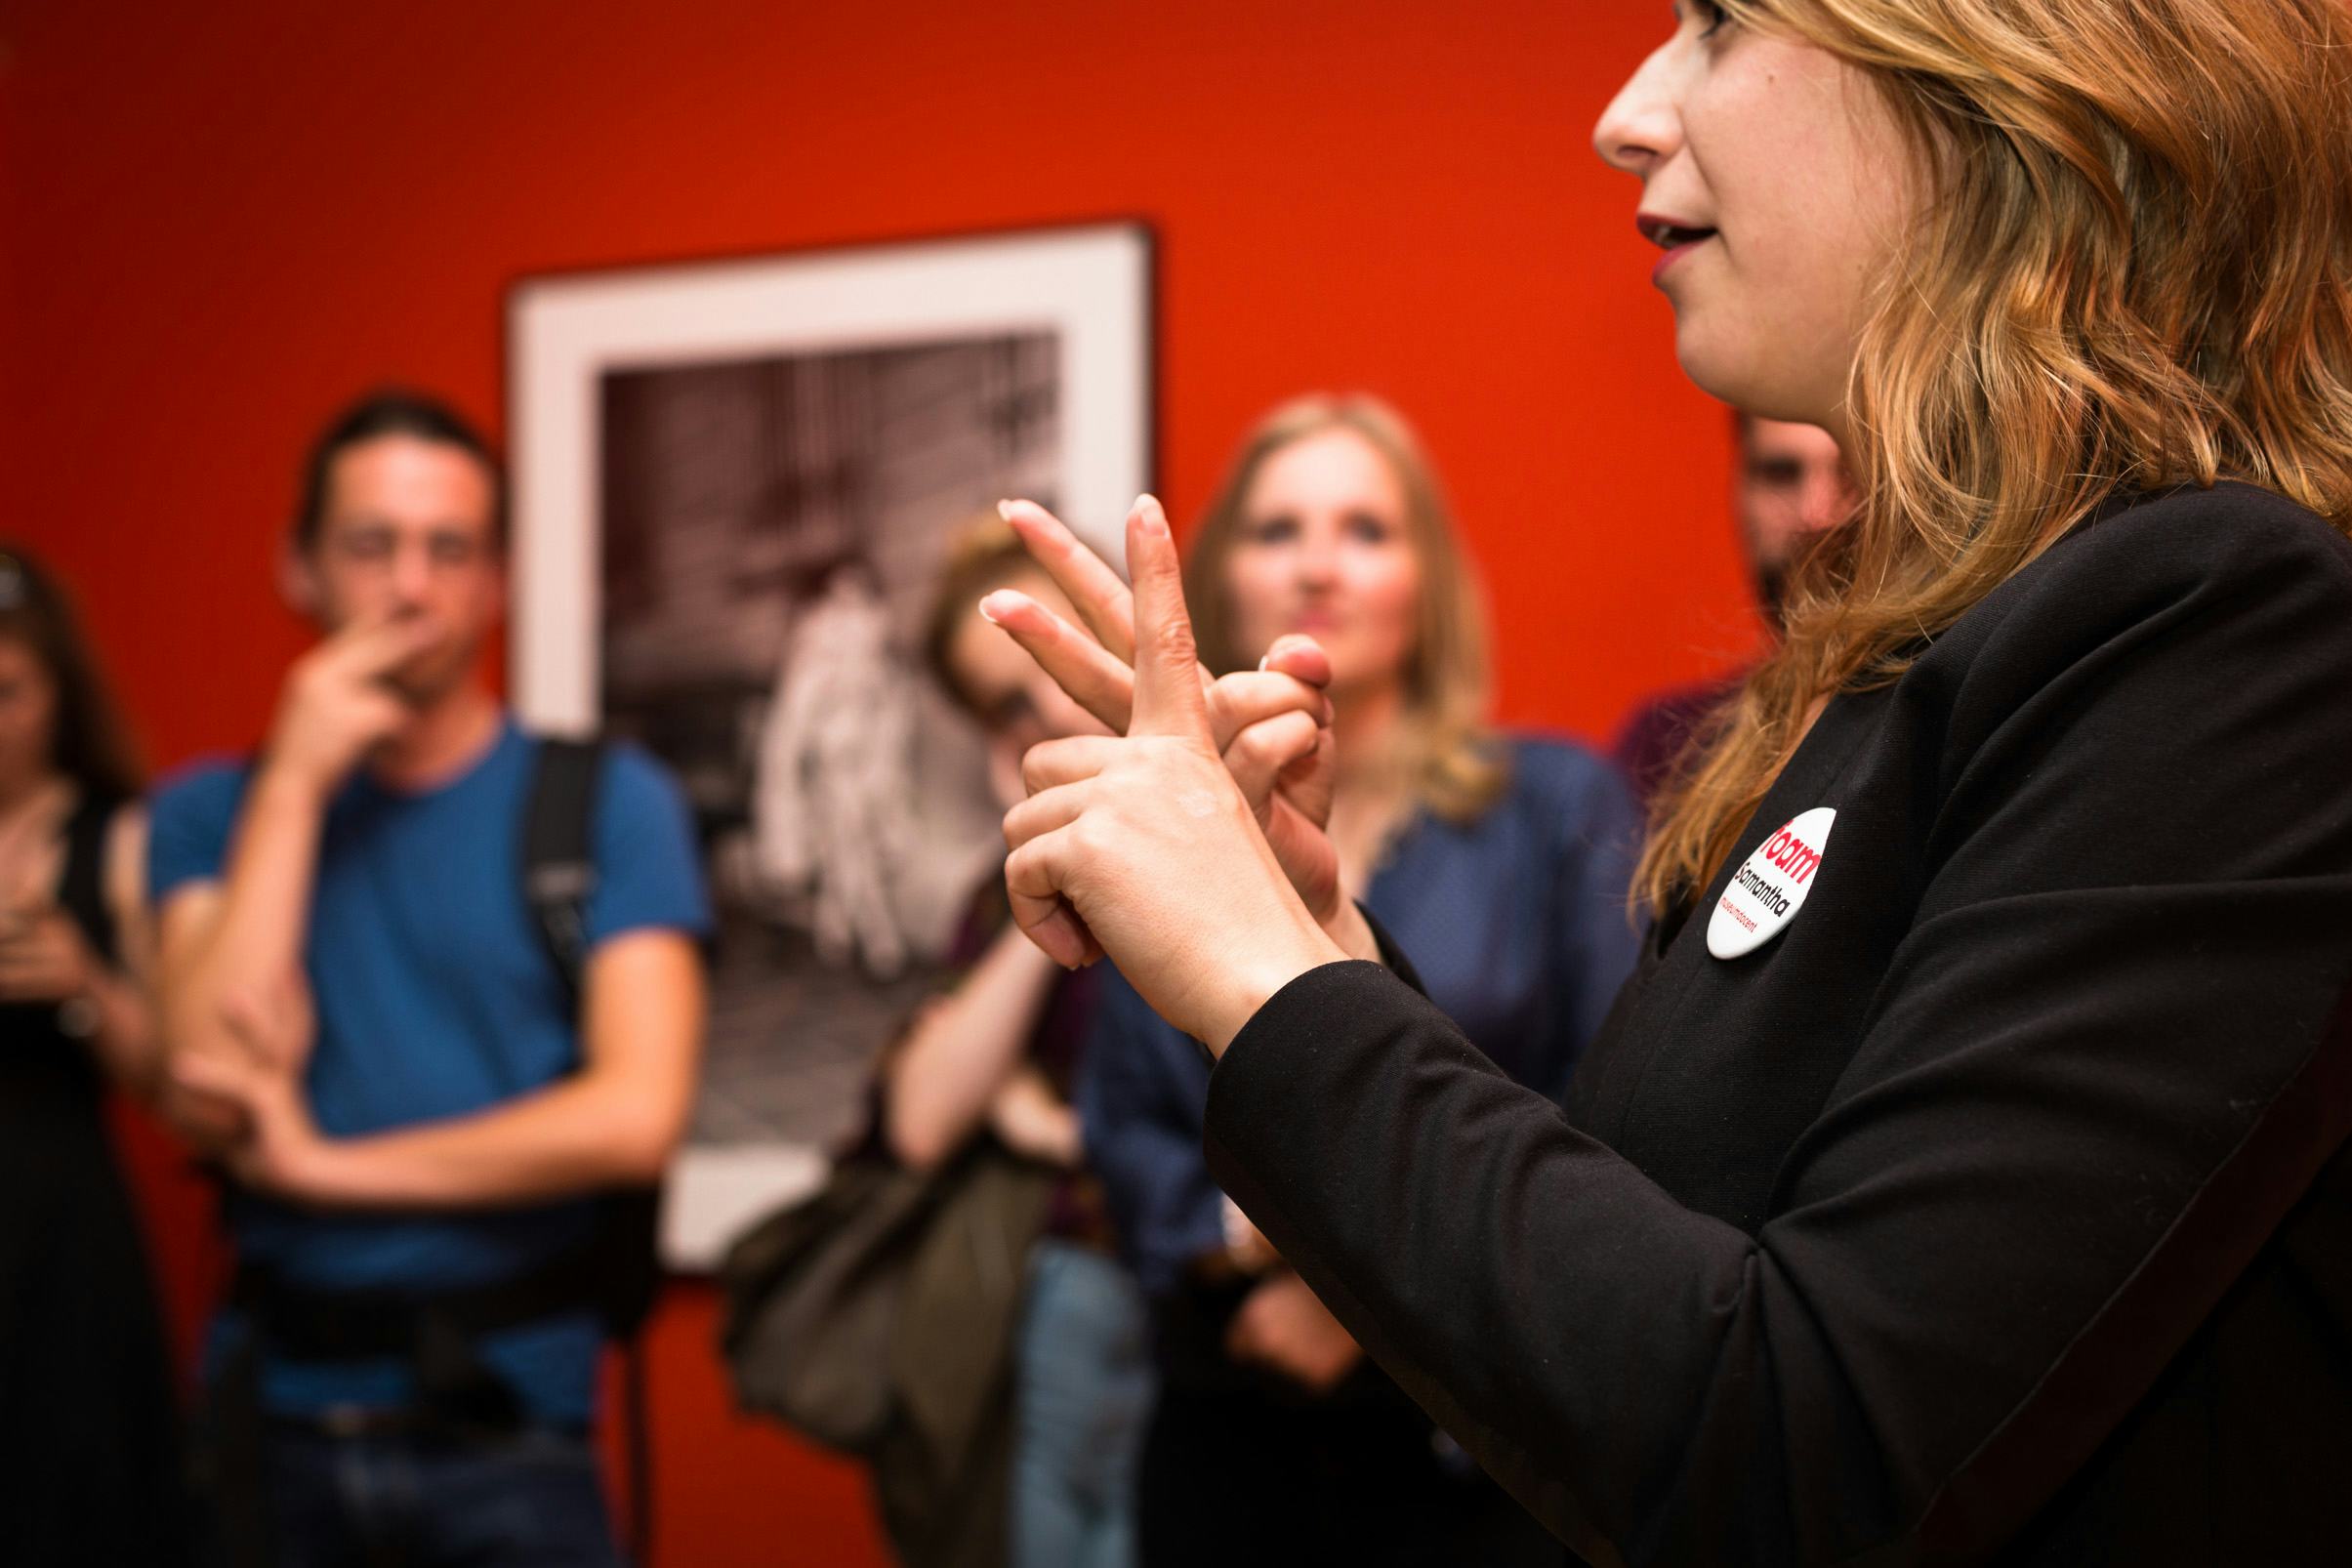 Museum teacher gives a tour in sign language